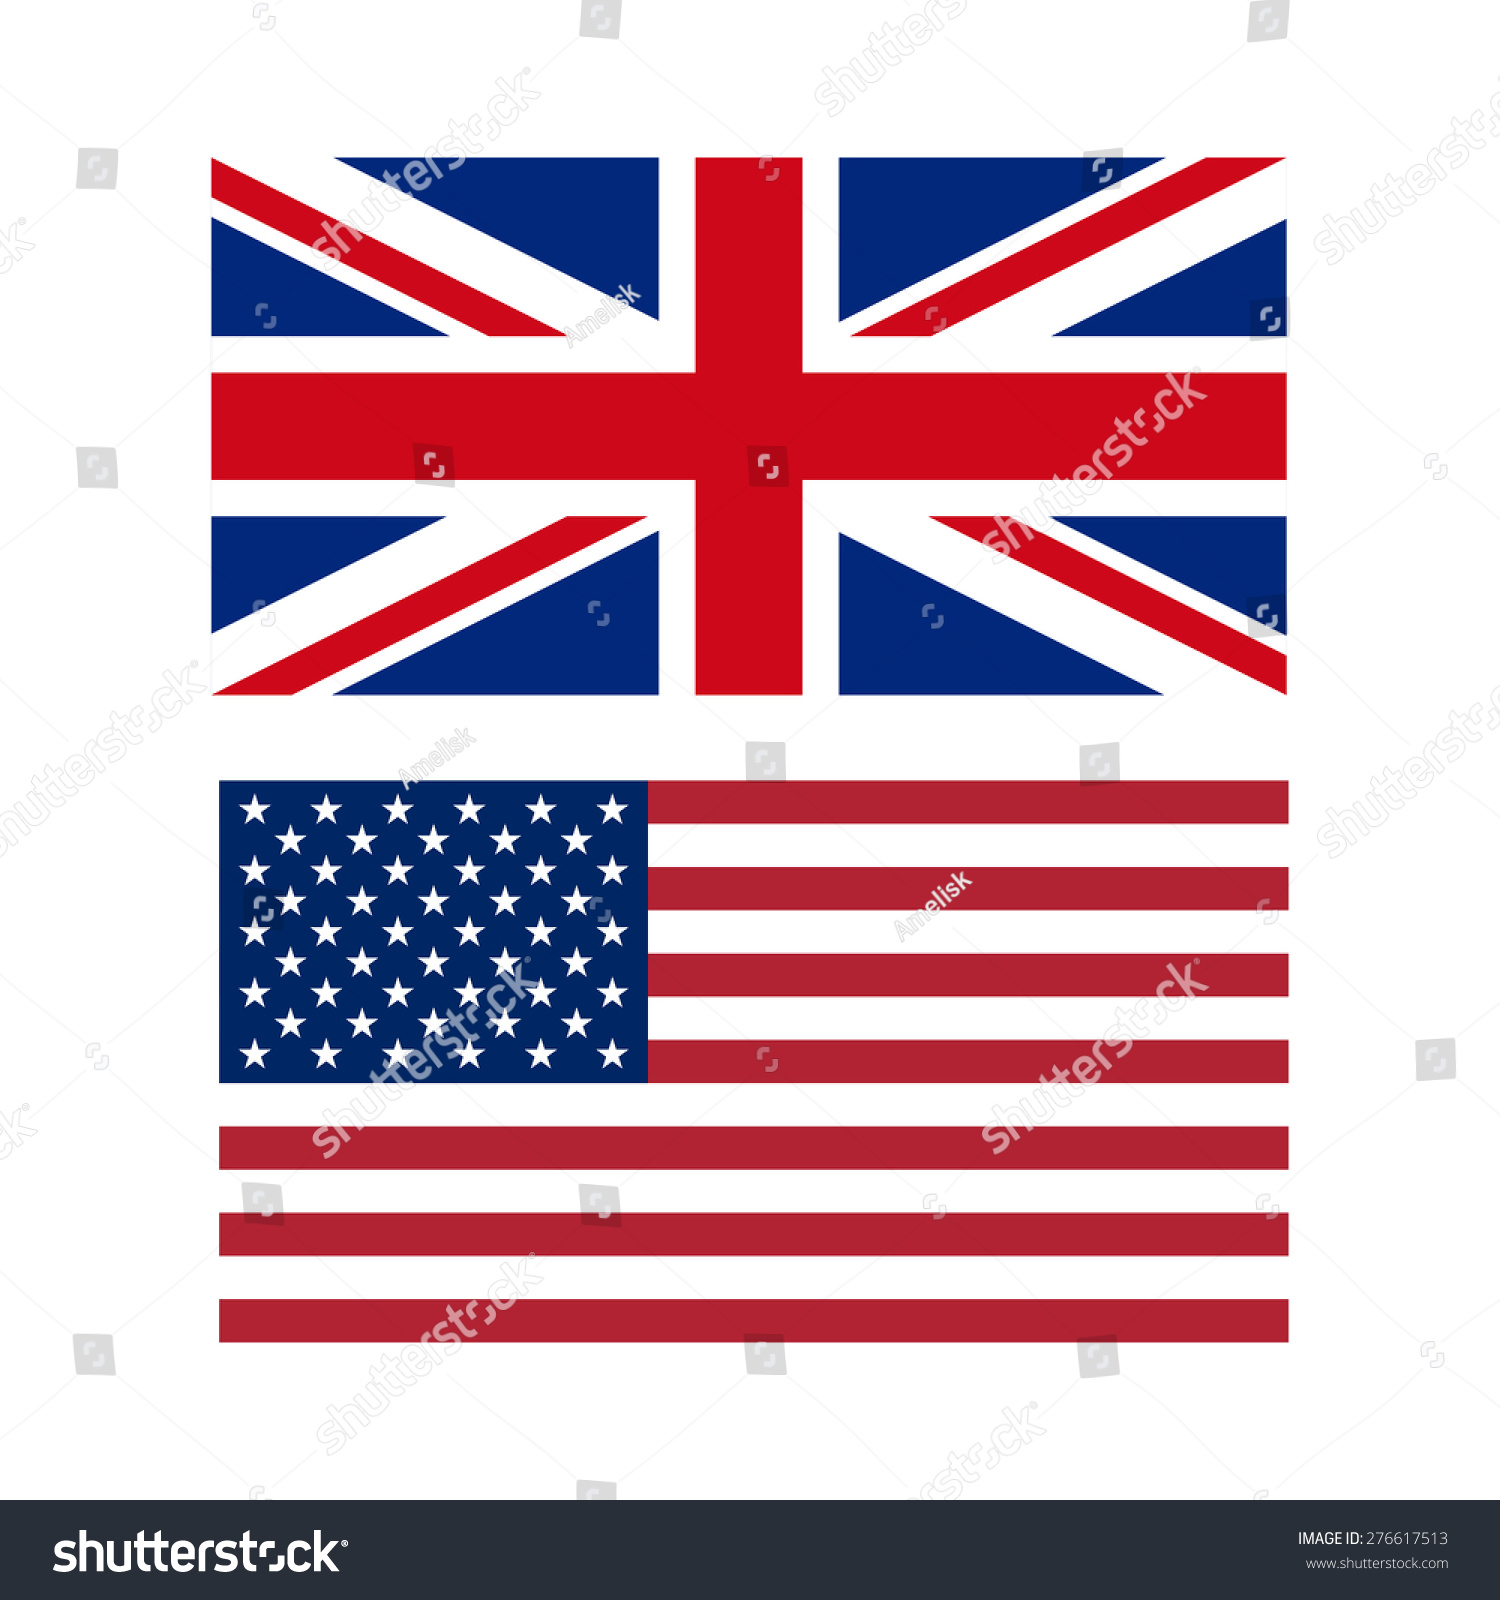 SVG of Vector illustration of flags of the US and UK svg